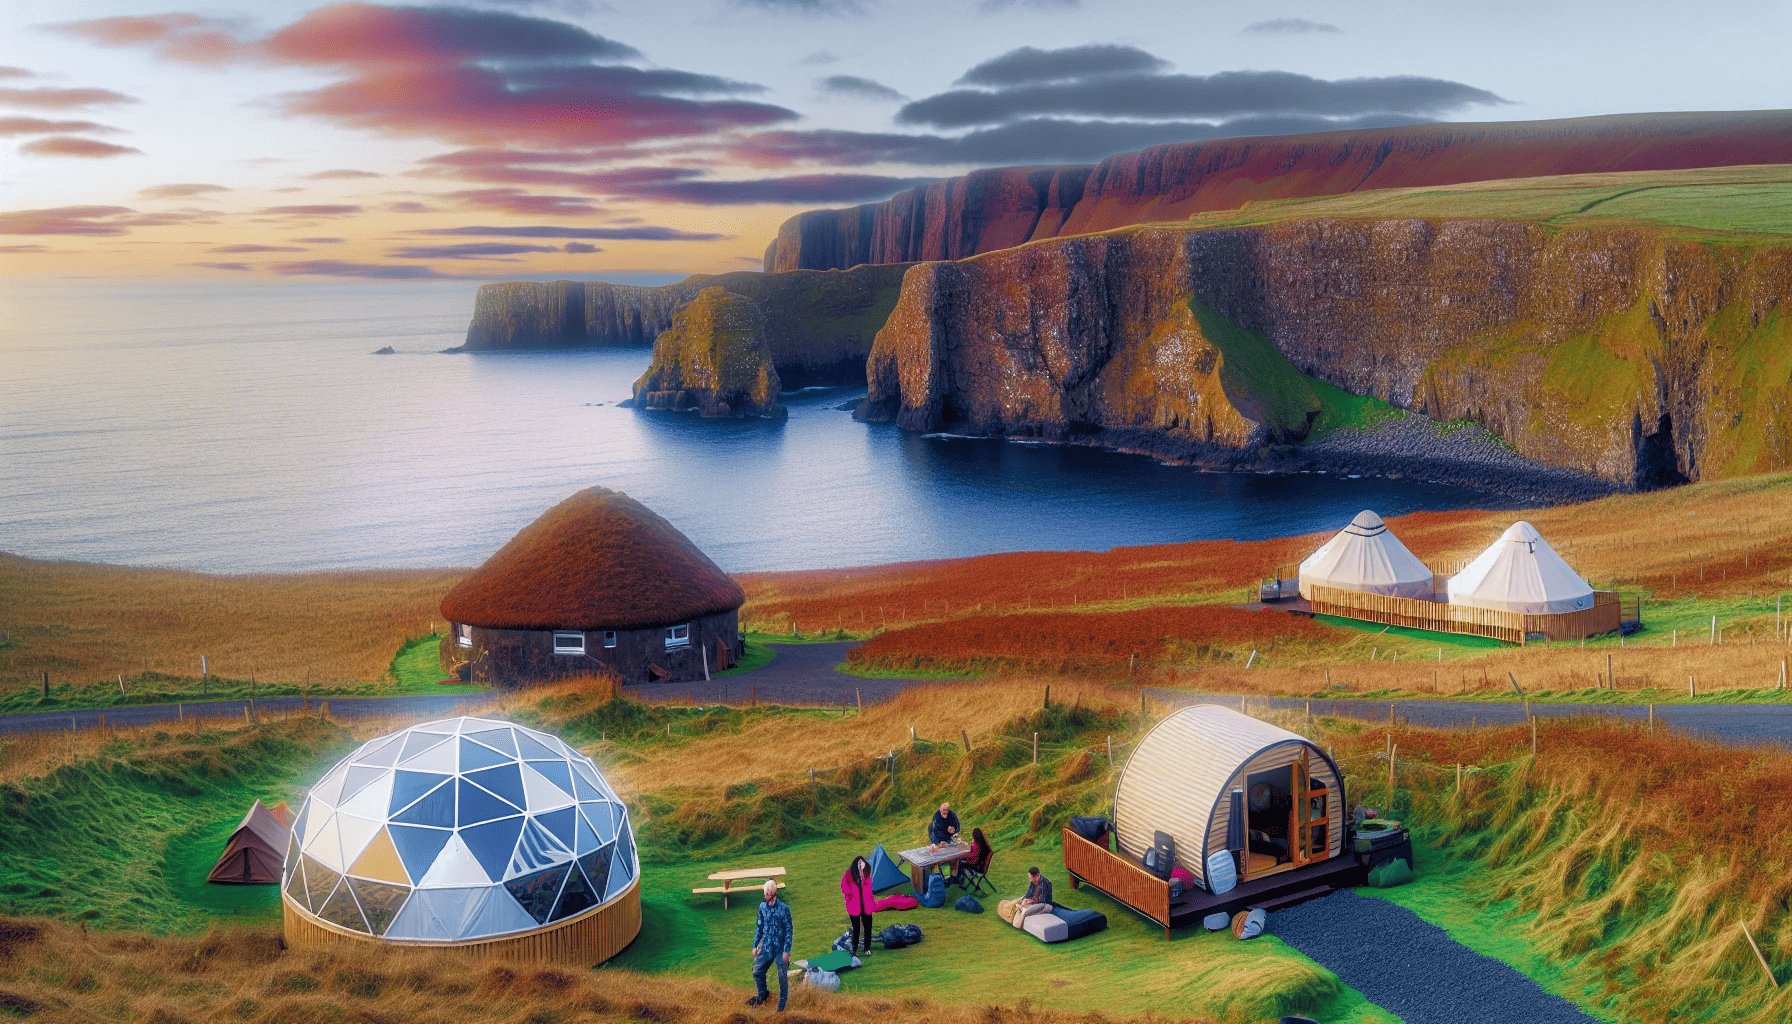 Scenic glamping location with dramatic coastline in Northern Ireland